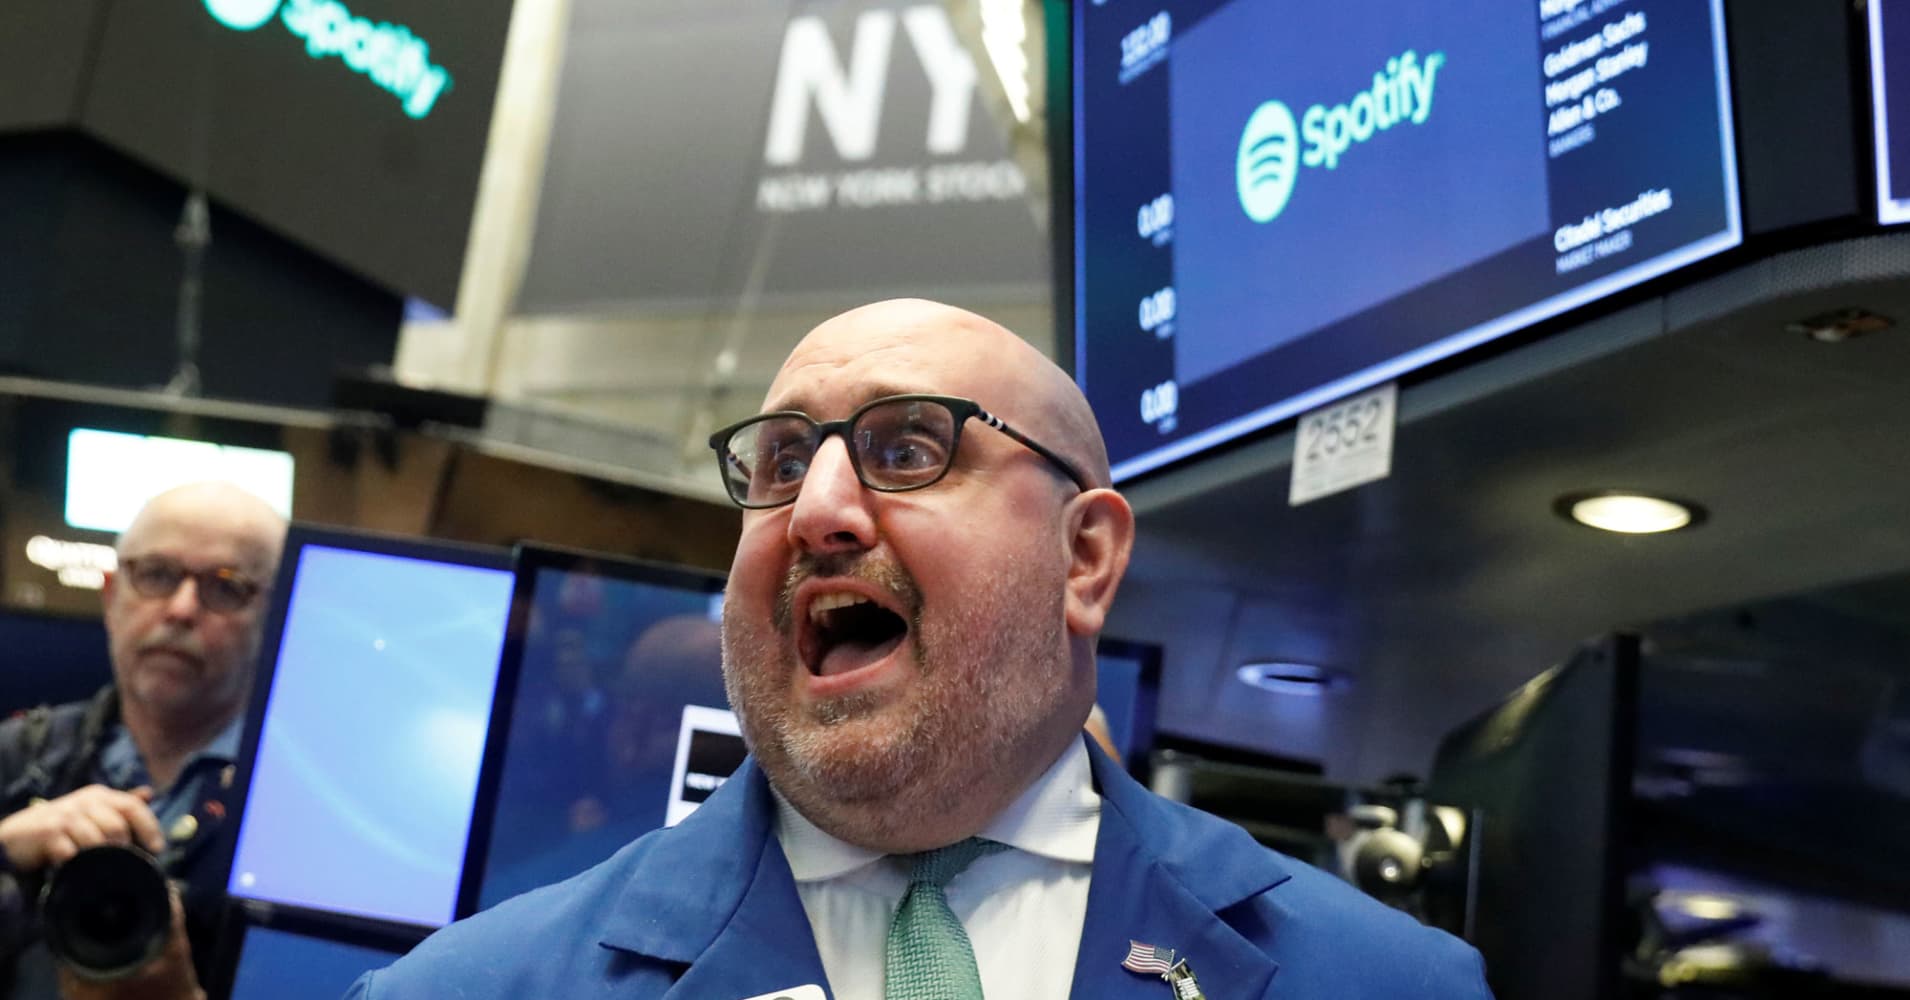 Barclays sees 20 percent gain for Spotify, says it's reinventing how music is sold